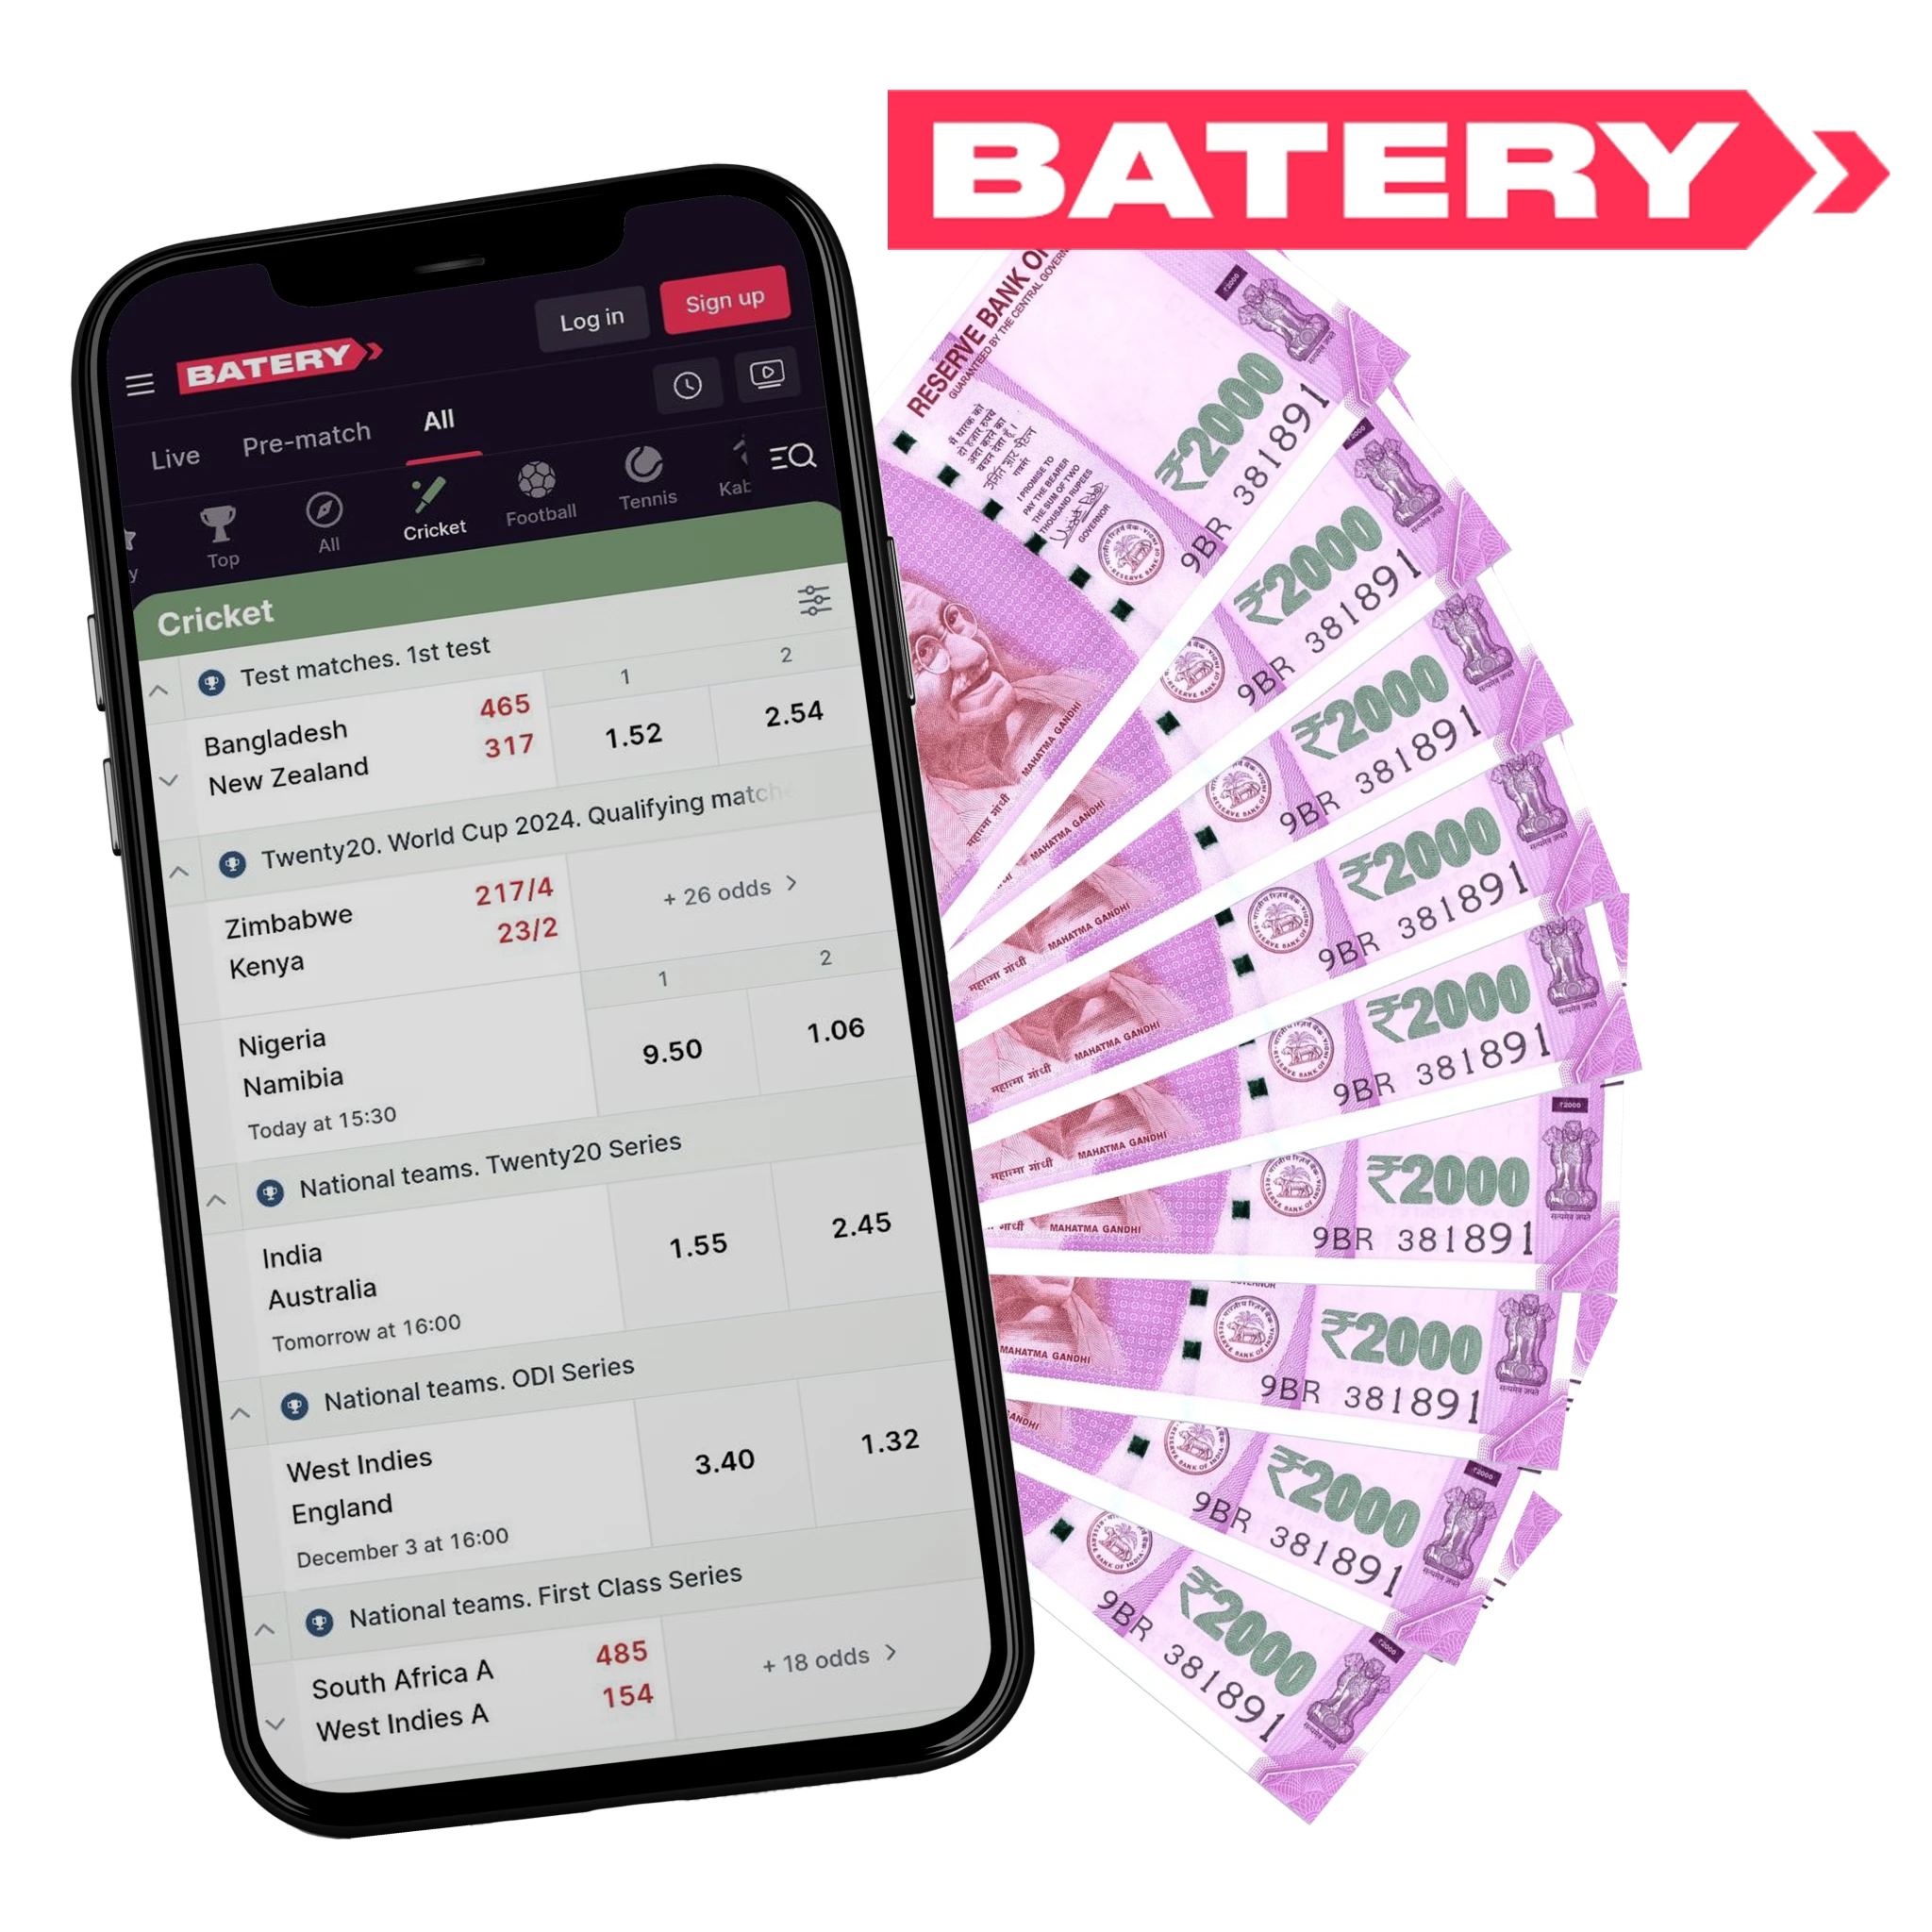 It takes a couple of minutes to download and install Batery mobile app for real money cricket betting.